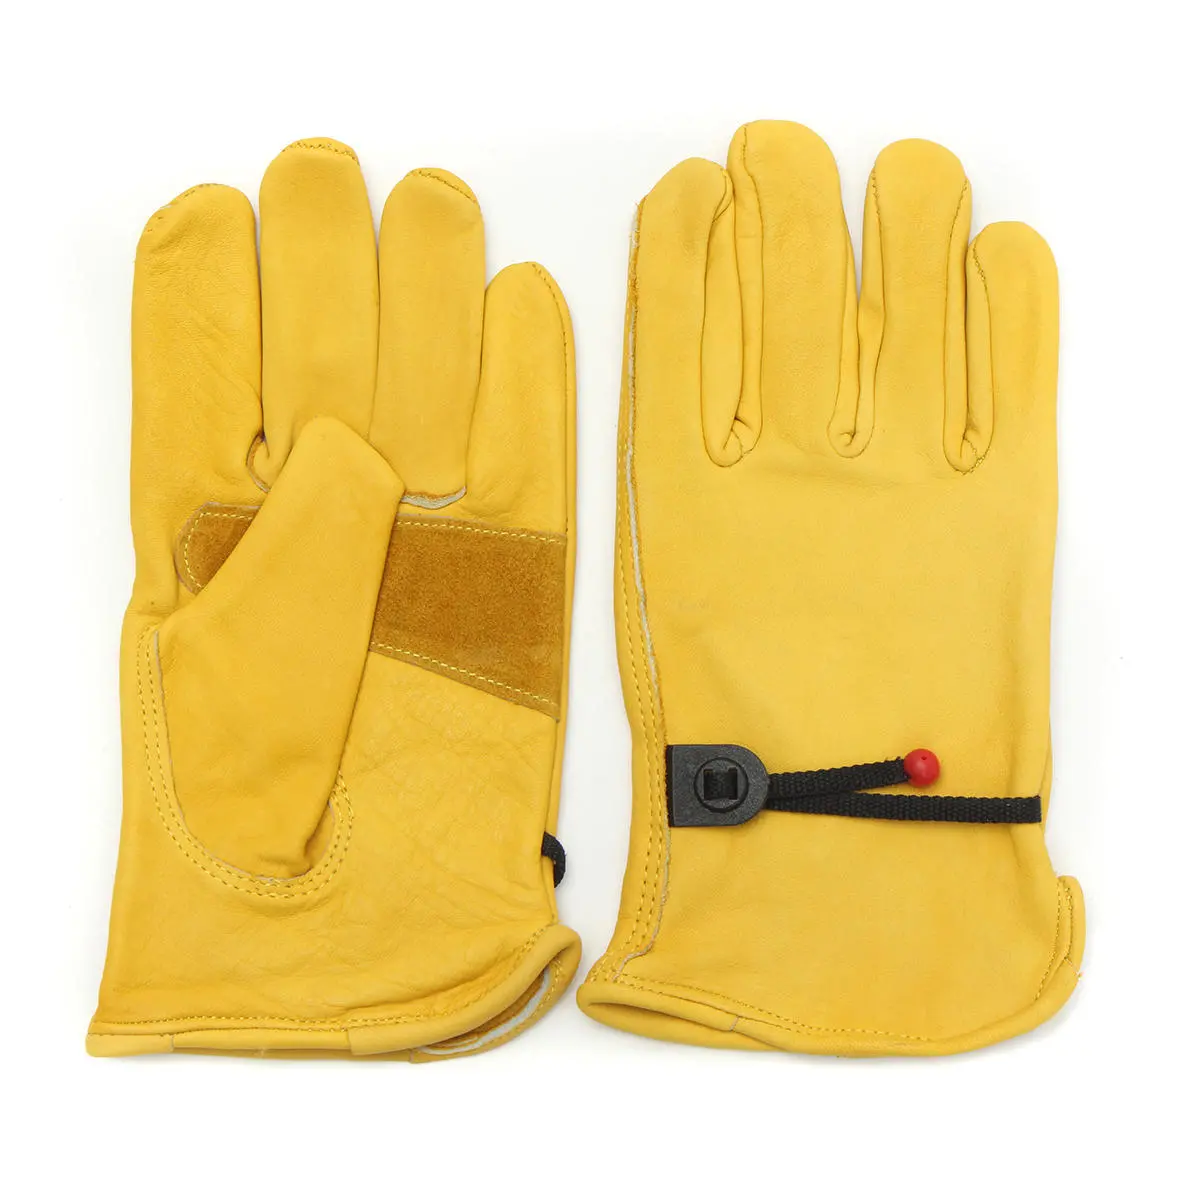 Yellow leather durable construction work gloves All-purpose safety gloves